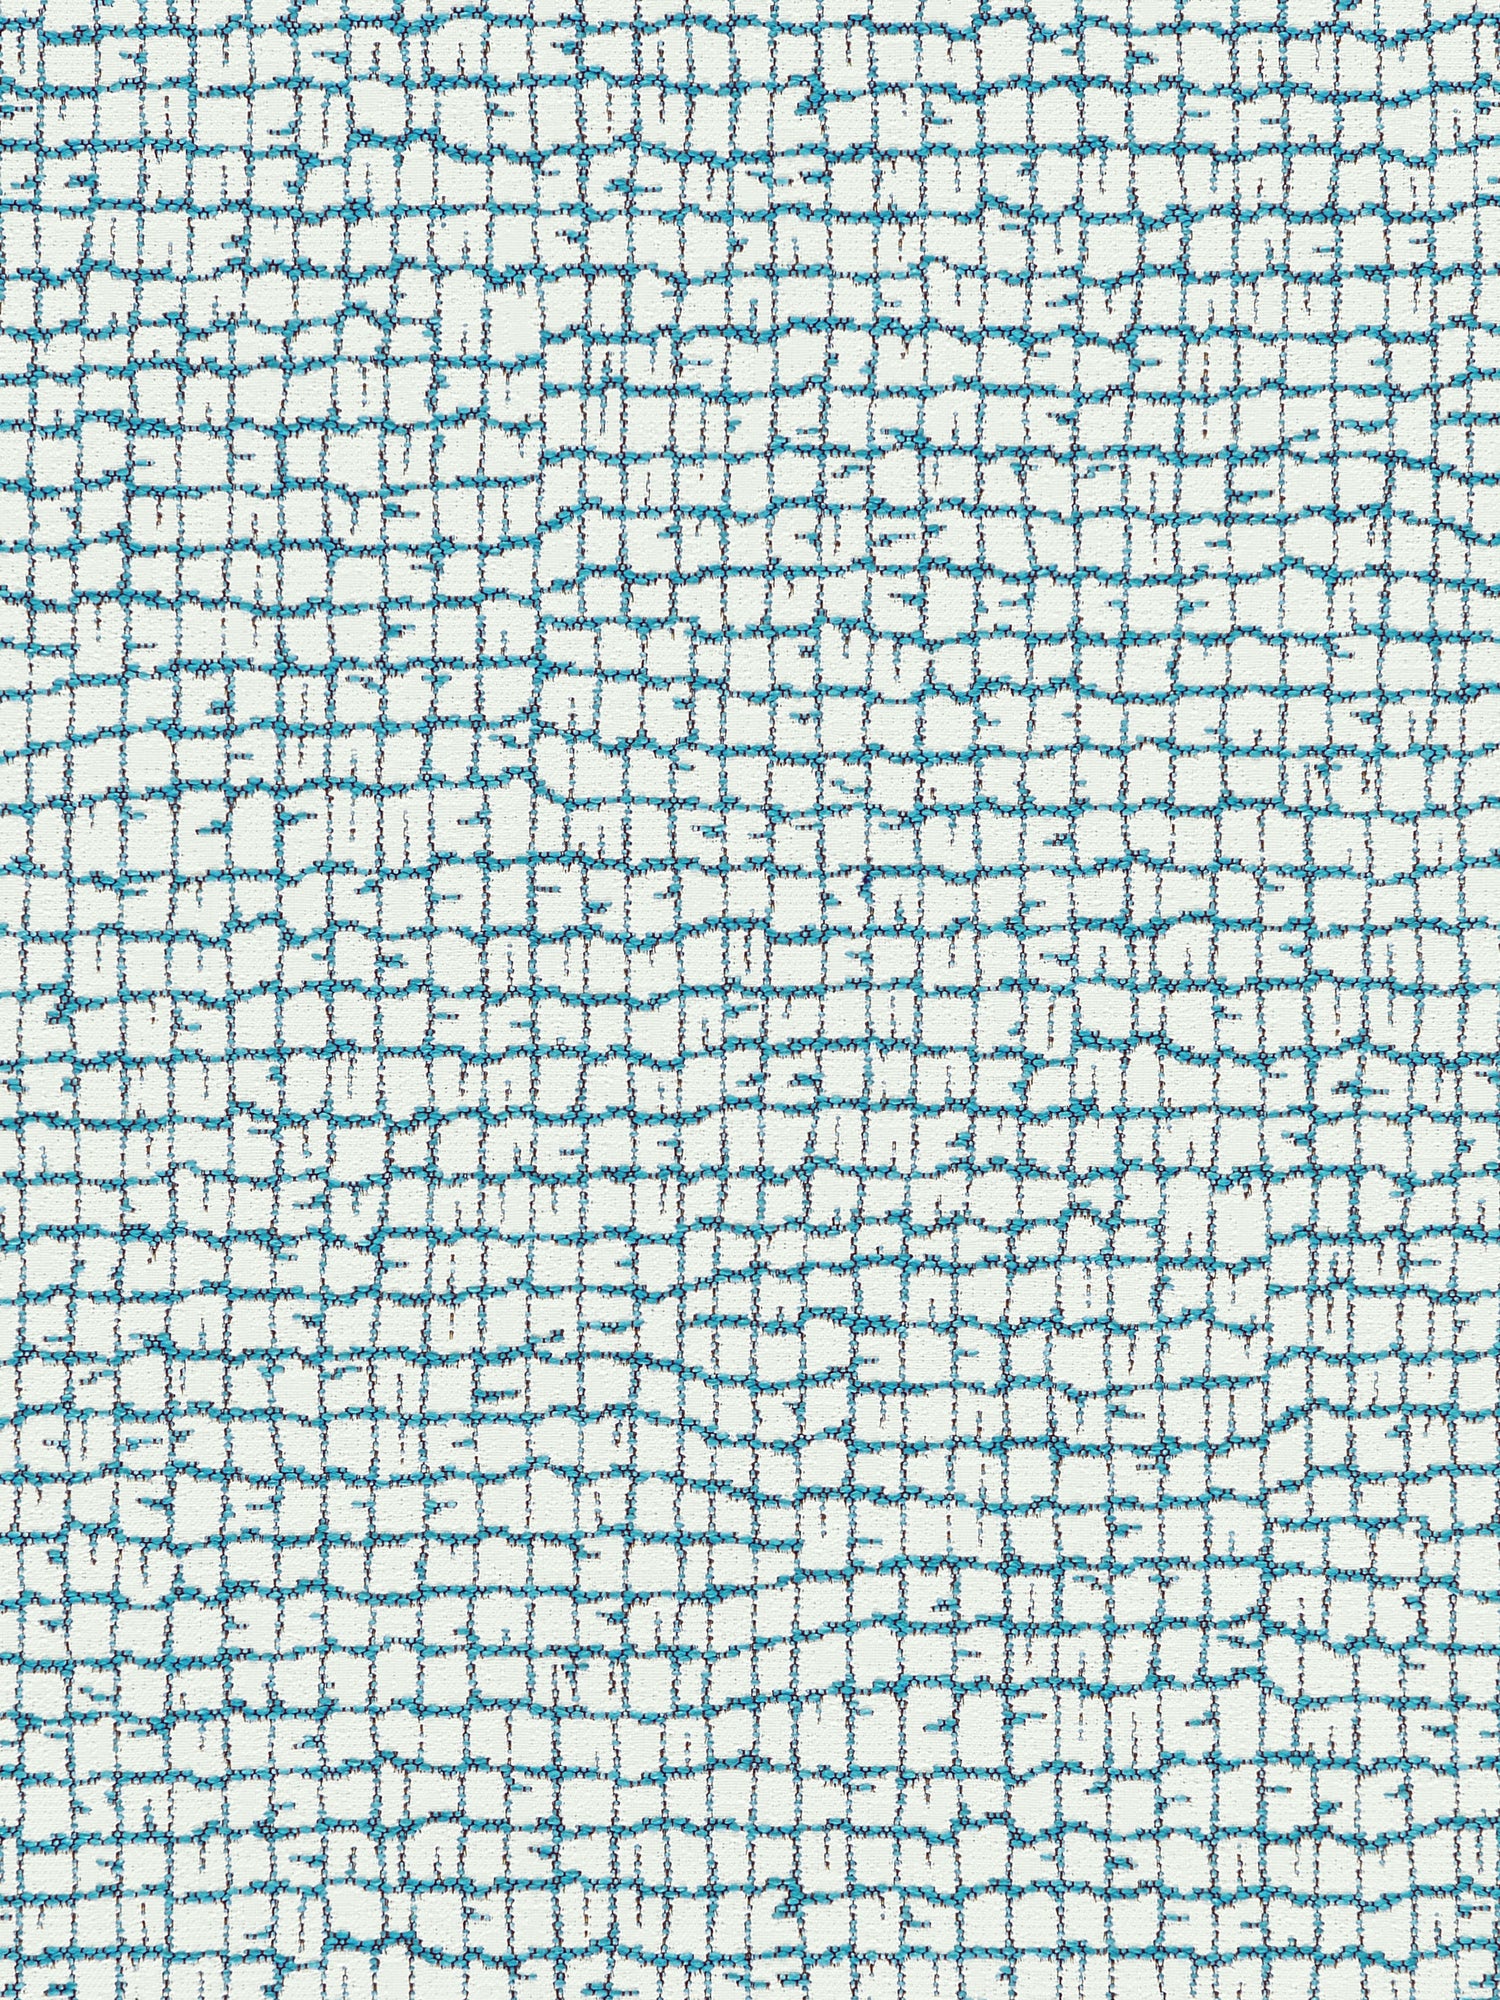 Troya Beach fabric in turquoise color - pattern number PO 0005TROY - by Scalamandre in the Old World Weavers collection